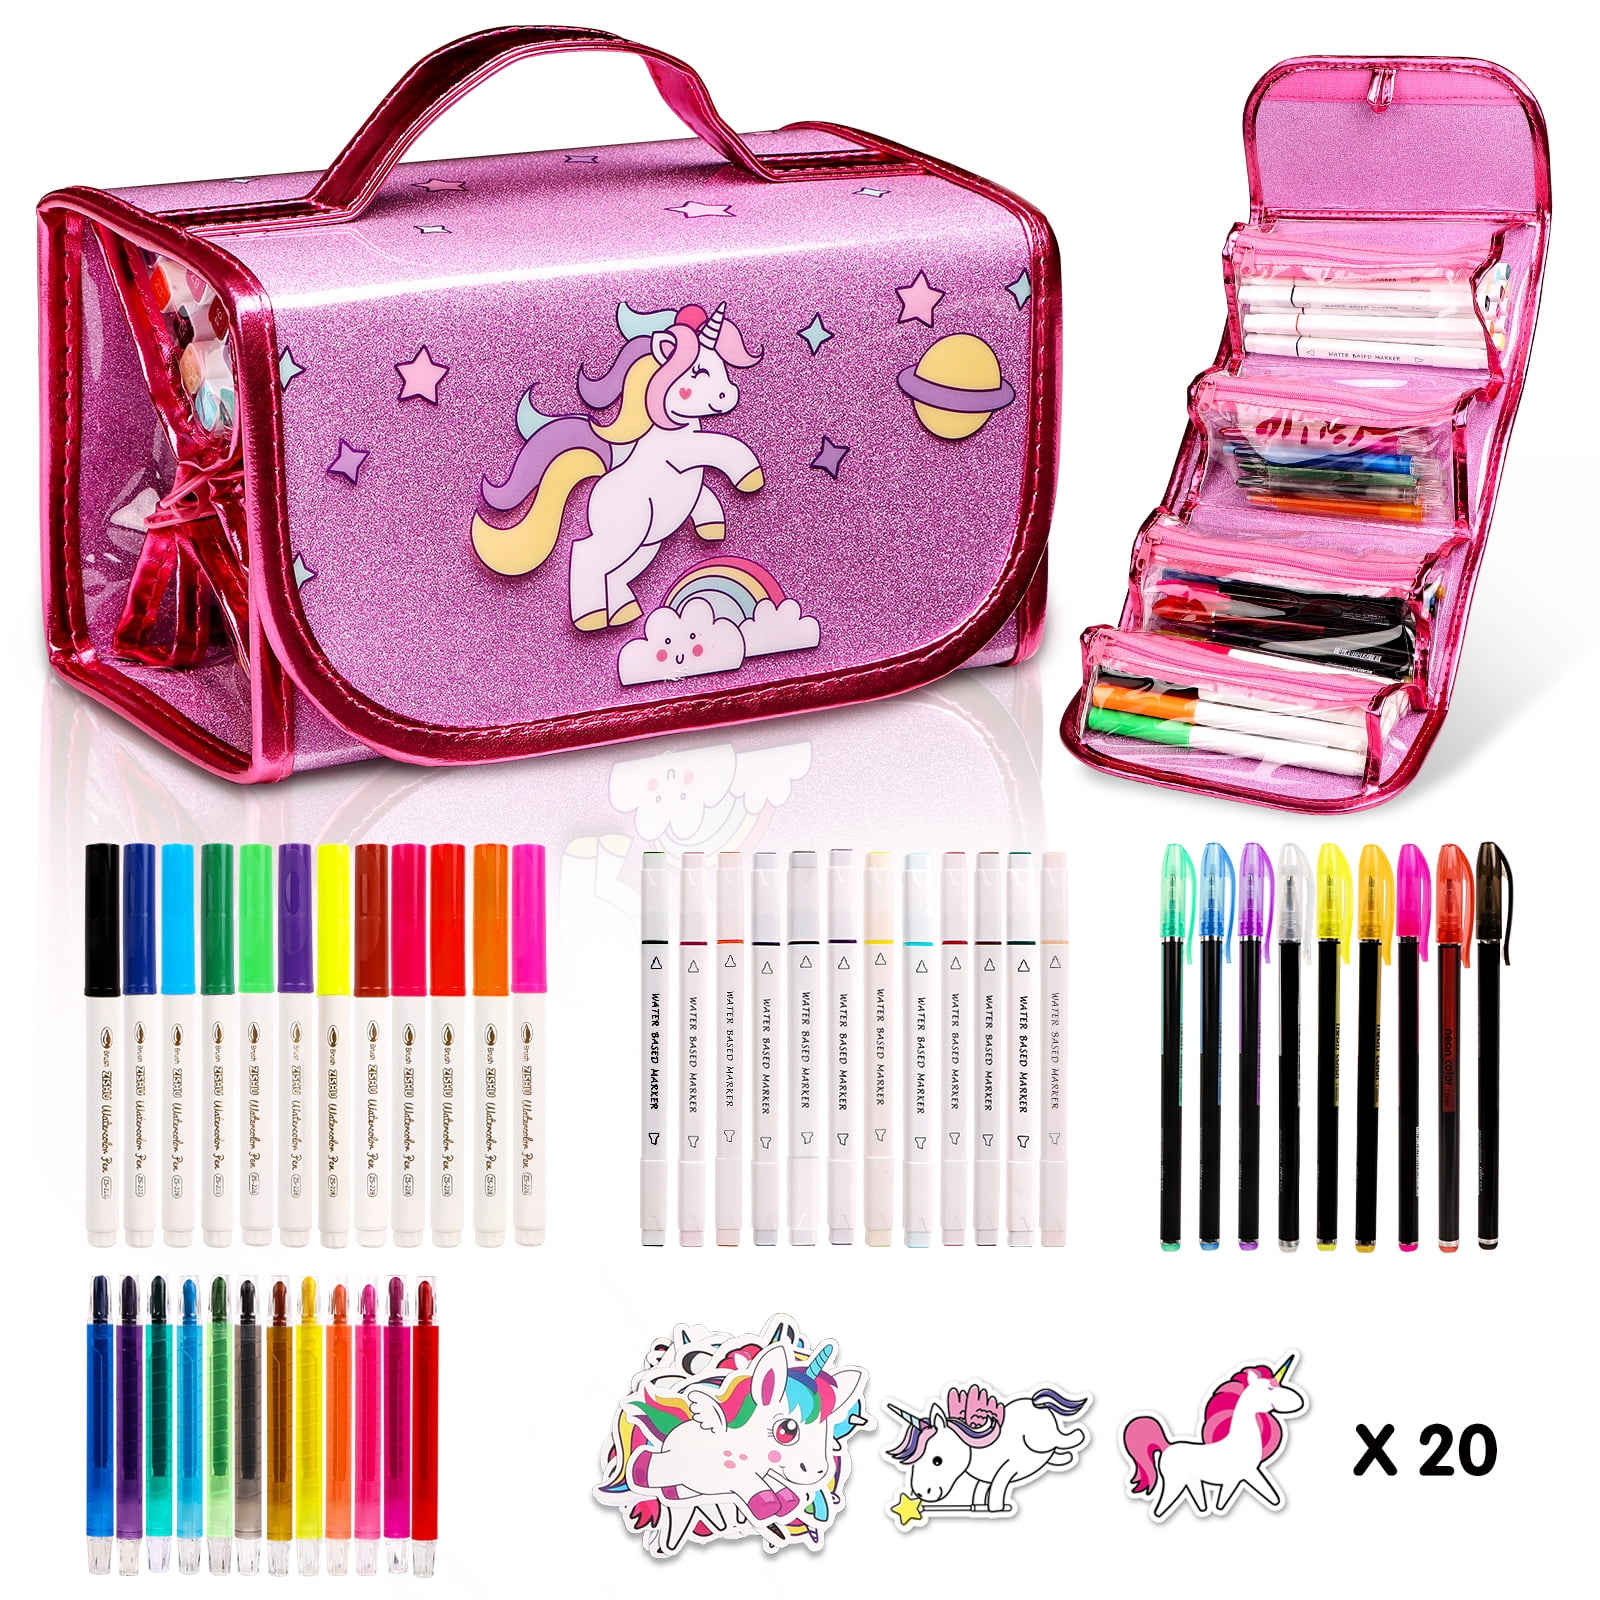 ZMYGOLON Fruit Scented Washable Markers Set with Unicorn Pencil Case, Unicorn Gifts for Girls 5 6 7 8 9 Year Old, 61 Pcs Arts and Crafts for Kids